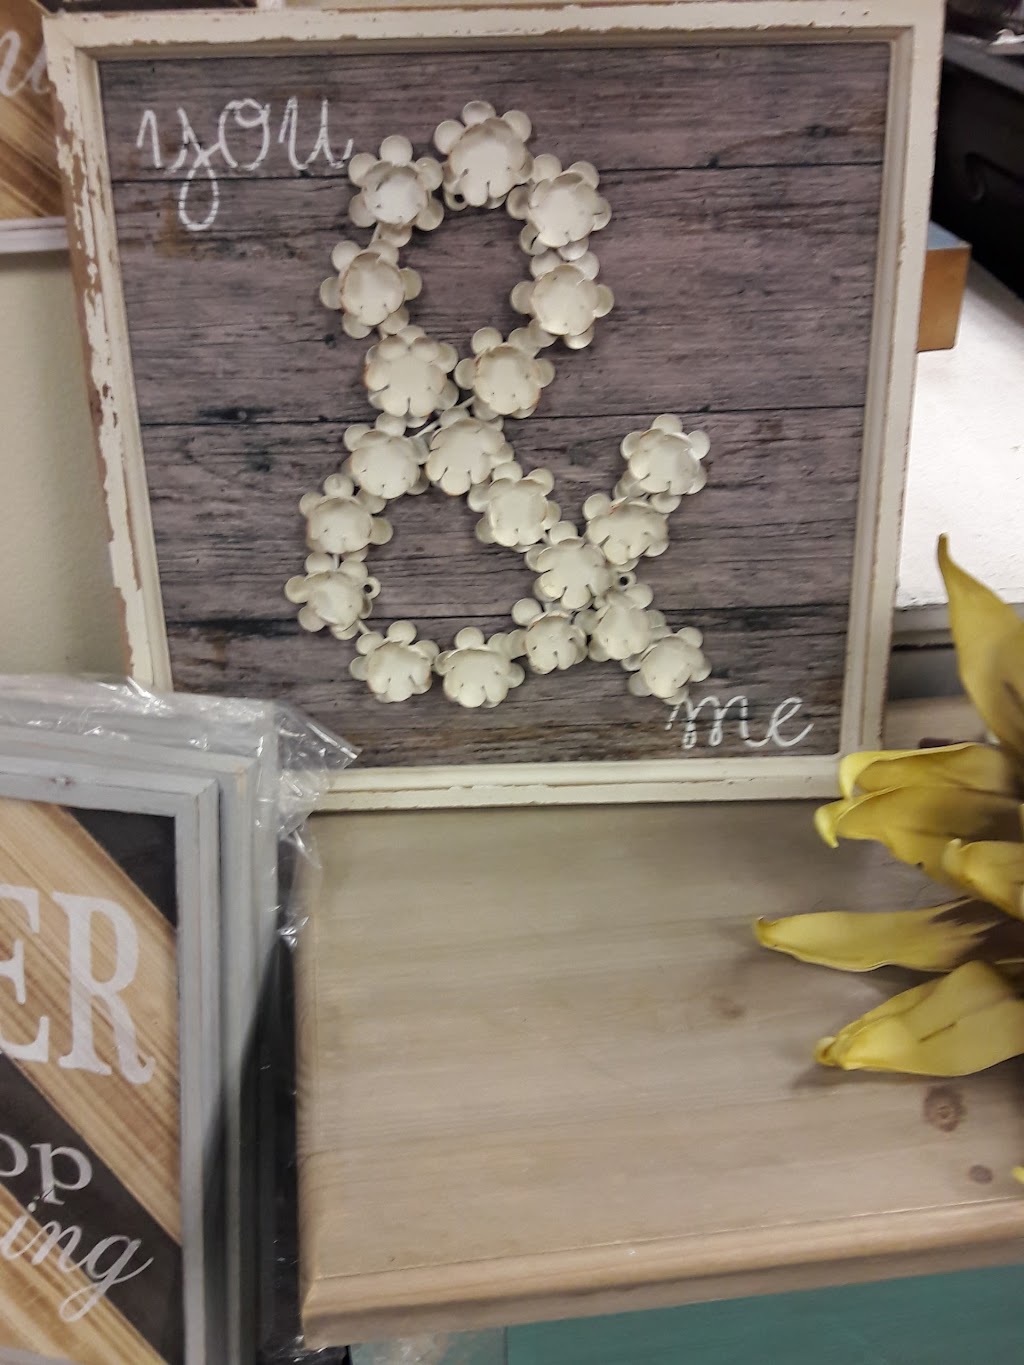 Graples Home Decor Outlet | 1219 N Galleria Dr, Nampa, ID 83687, USA | Phone: (208) 907-2135